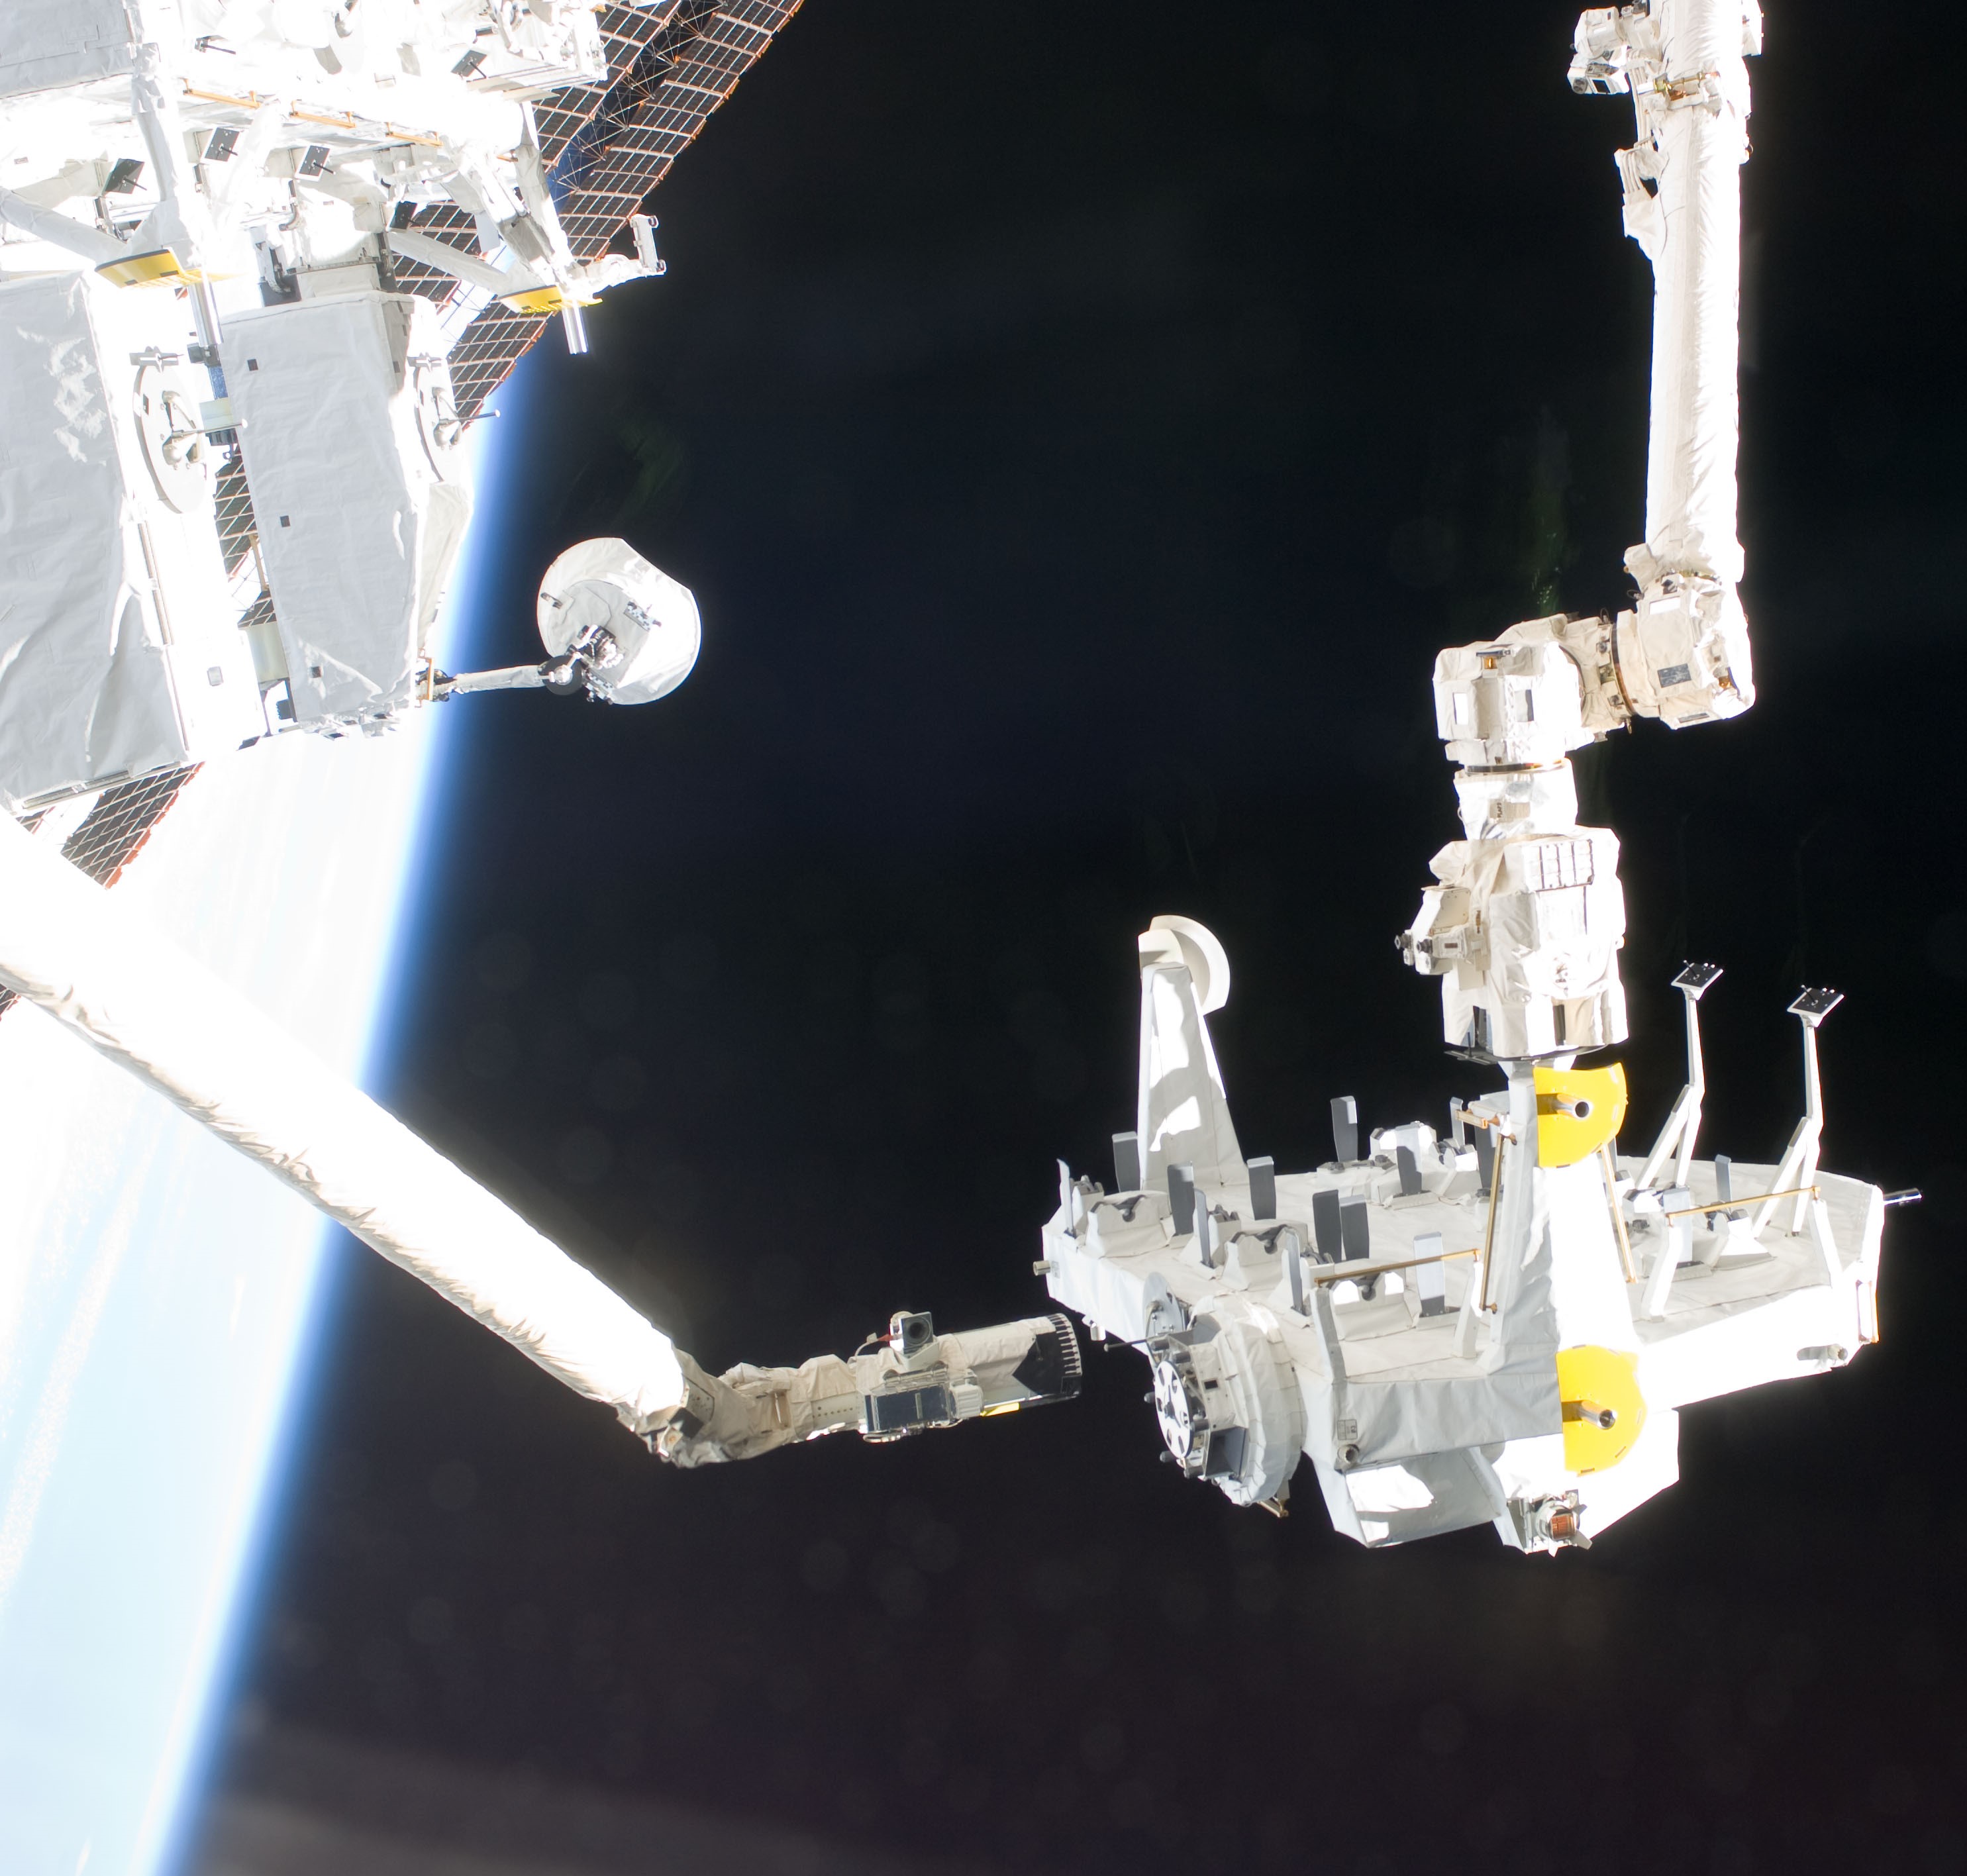 Return of the empty Exposed Logistics Module to Endeavour’s payload bay